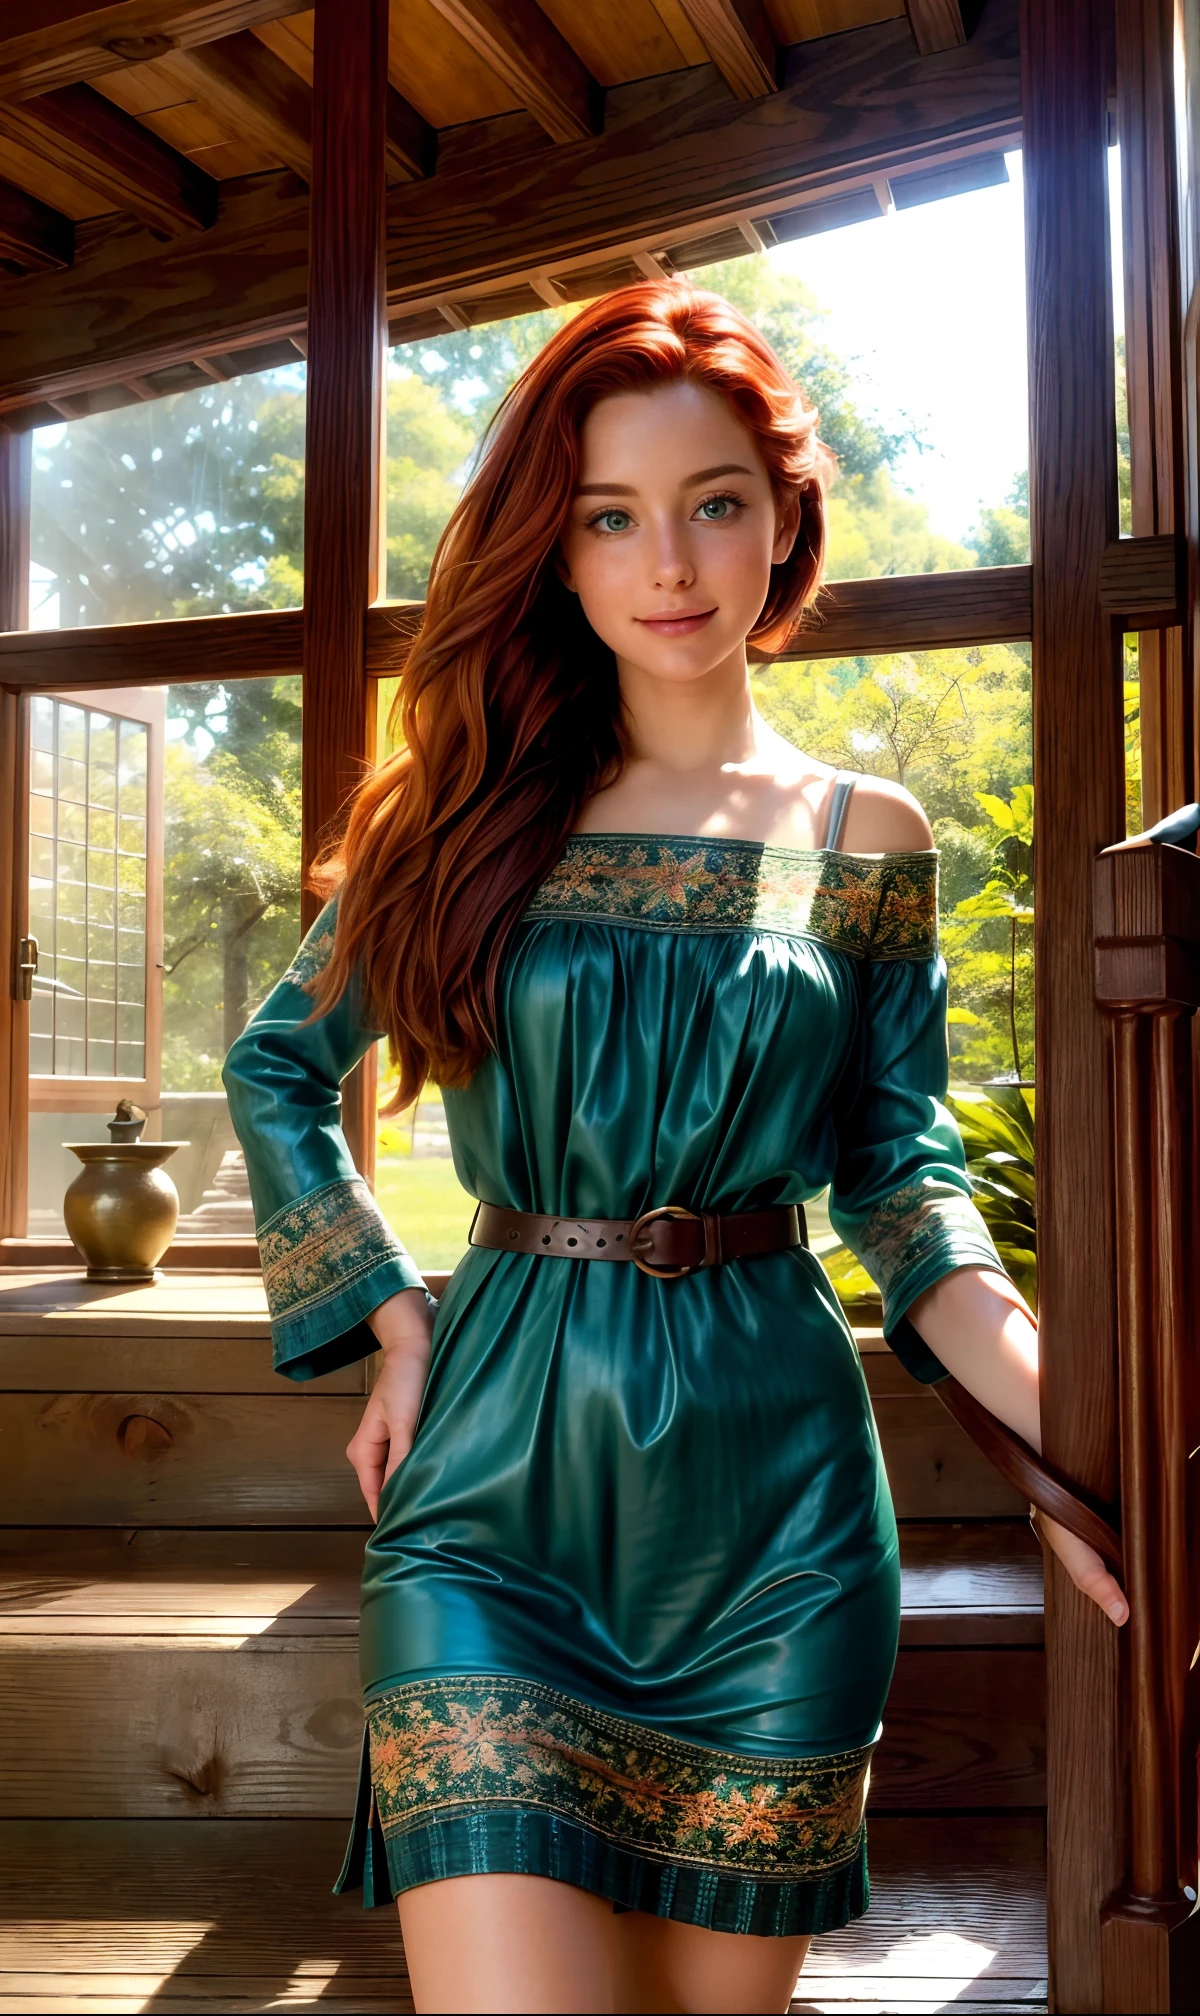 (((Ultra detailed, beautiful face, Megapixel))) Amidst a charming and rustic countryside manor, a spirited and free-spirited young woman explores a quaint ((wooden spiral staircase)). Her ((auburn curls)) bounce playfully with each step she takes, and her ((expressive green eyes)) are filled with curiosity and joy. She wears a bohemian-inspired dress with a flowing skirt adorned with whimsical floral patterns, echoing the beauty of the surrounding gardens. A handwoven leather belt cinches her waist, adding a touch of rustic charm to her ensemble. Her attire is completed with a pair of comfortable and stylish leather boots, perfect for wandering through the enchanting manor. With an adventurous spirit, she ventures up the spiral staircase, her fingers lightly brushing against the wooden handrail. The manor's interior is filled with warm and inviting colors, and sunlight streams through the windows, casting playful shadows on the staircase. The gentle sounds of birds chirping and leaves rustling add to the idyllic and peaceful atmosphere, inviting her to embark on a delightful exploration of the manor's hidden nooks and crannies.